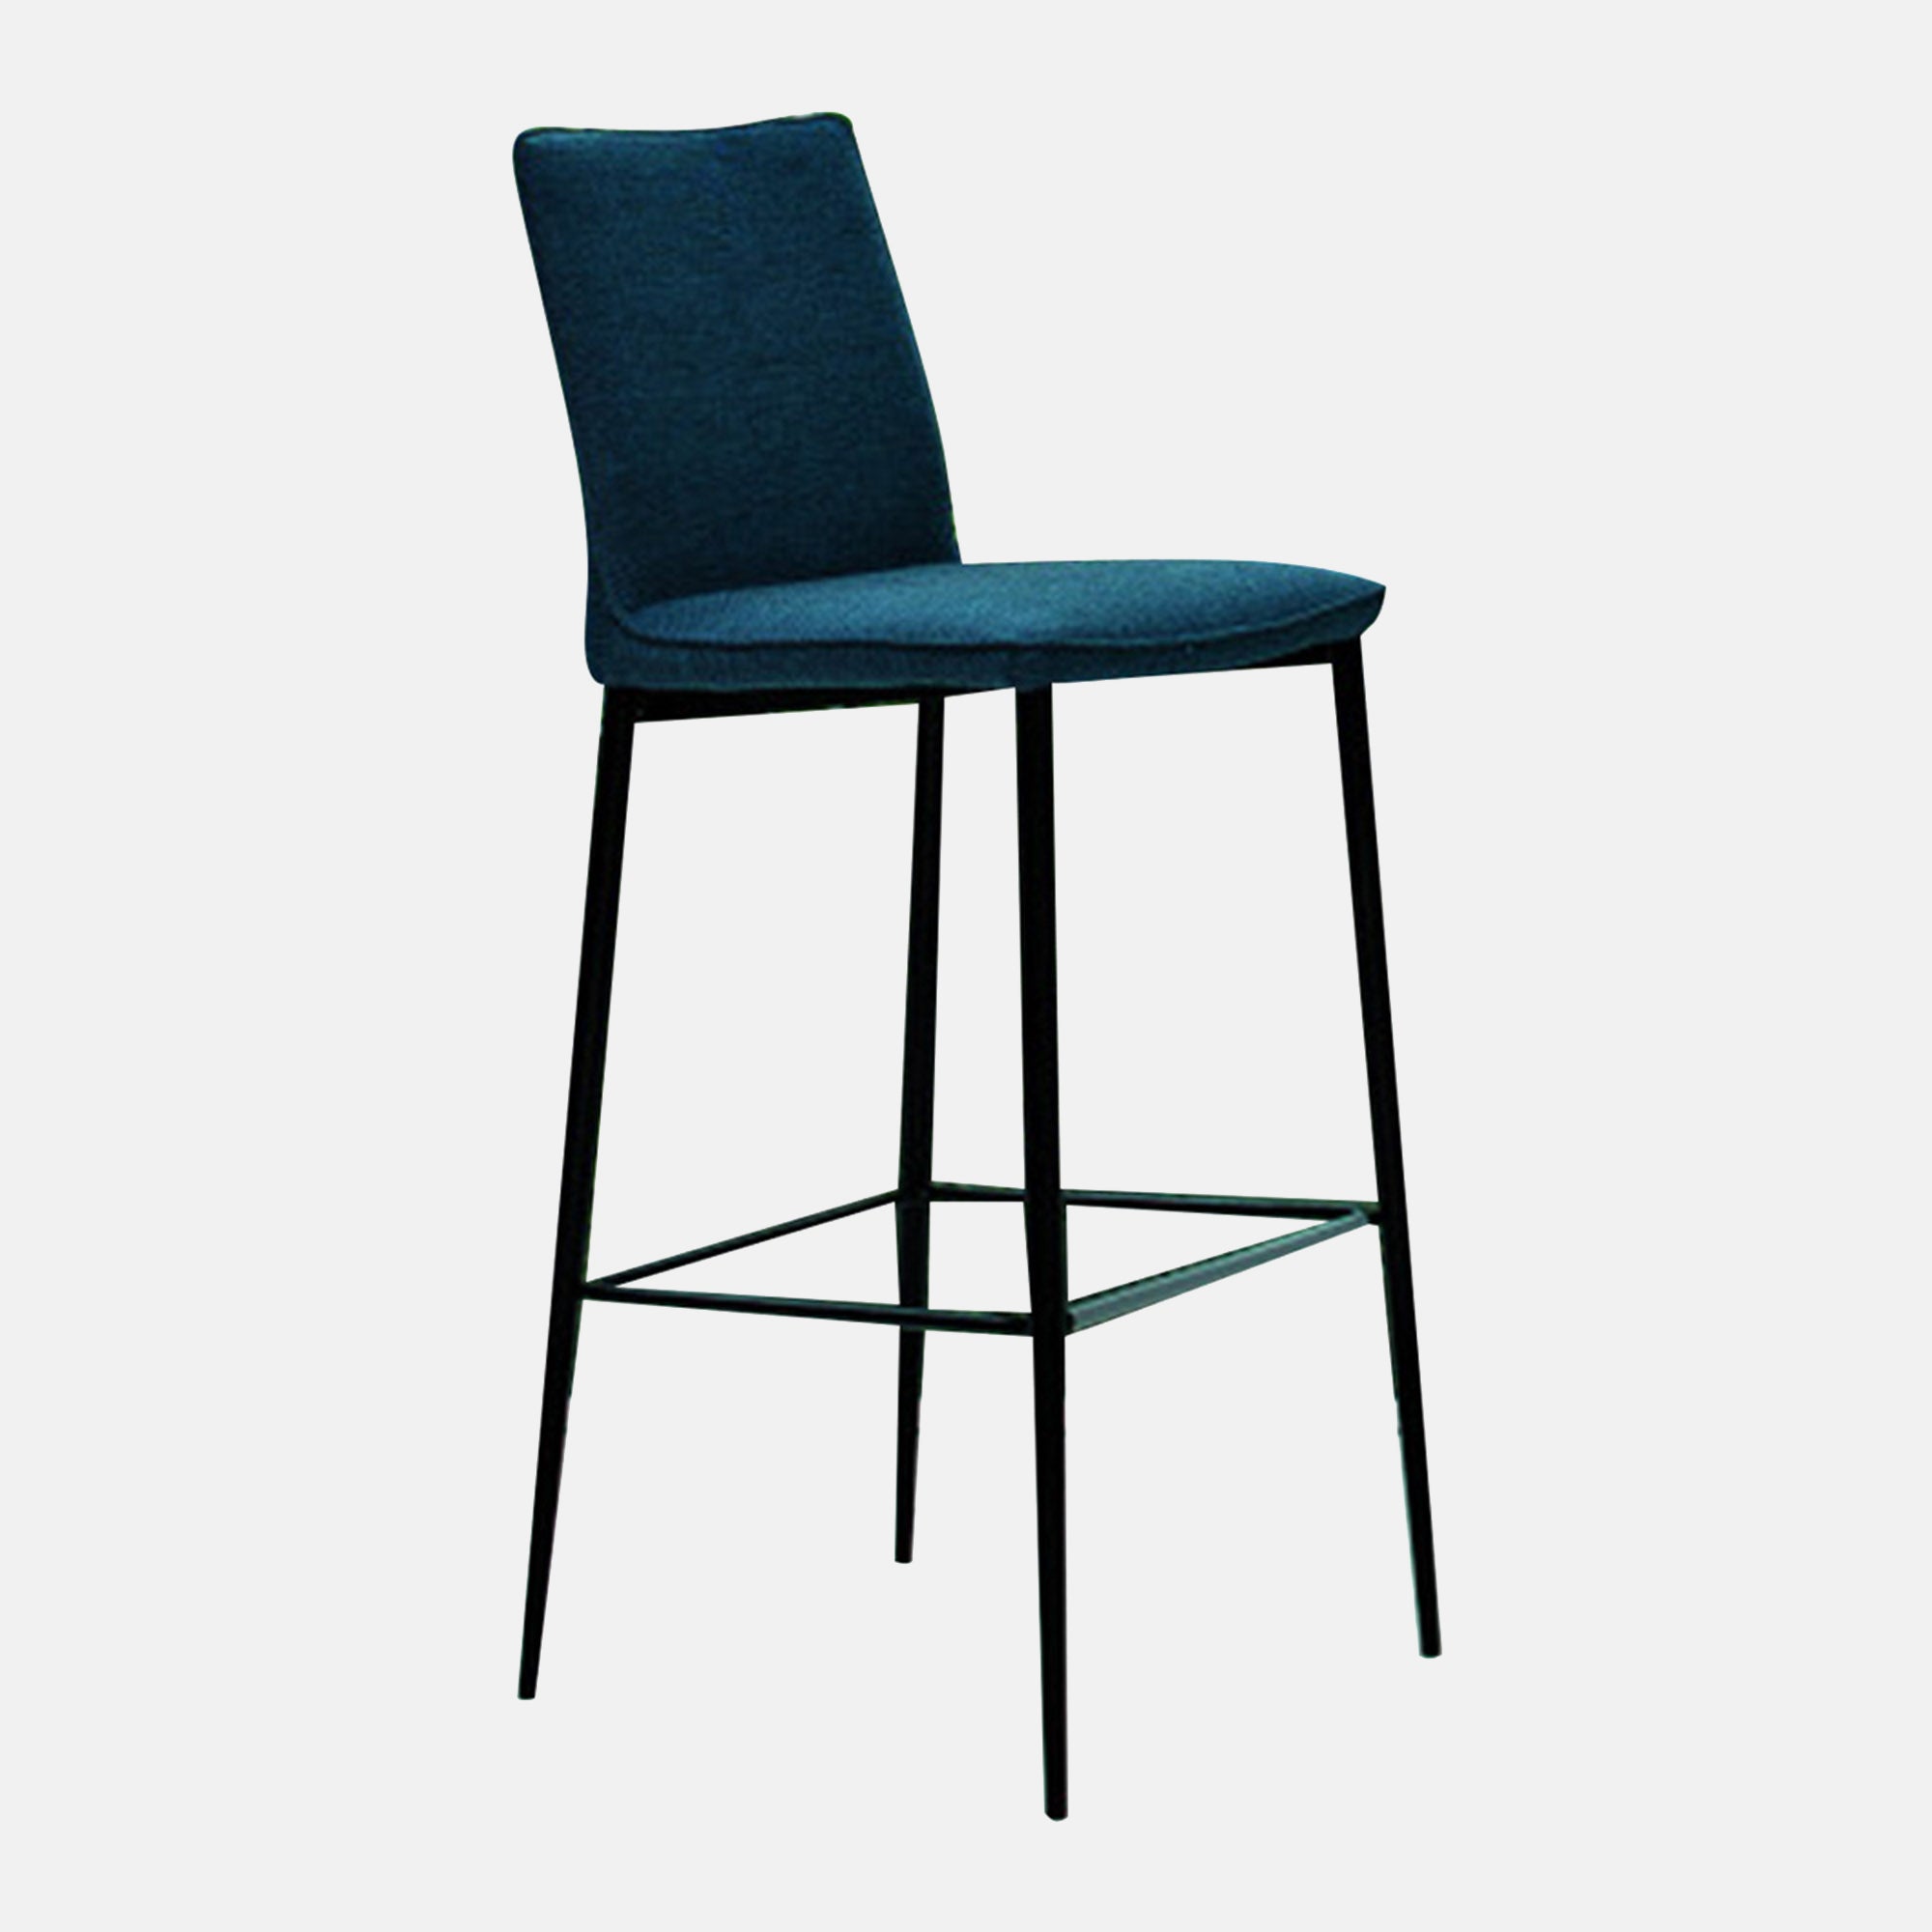 34.36 High Barstool Metal Legs in Eco Leather with Matching Piping